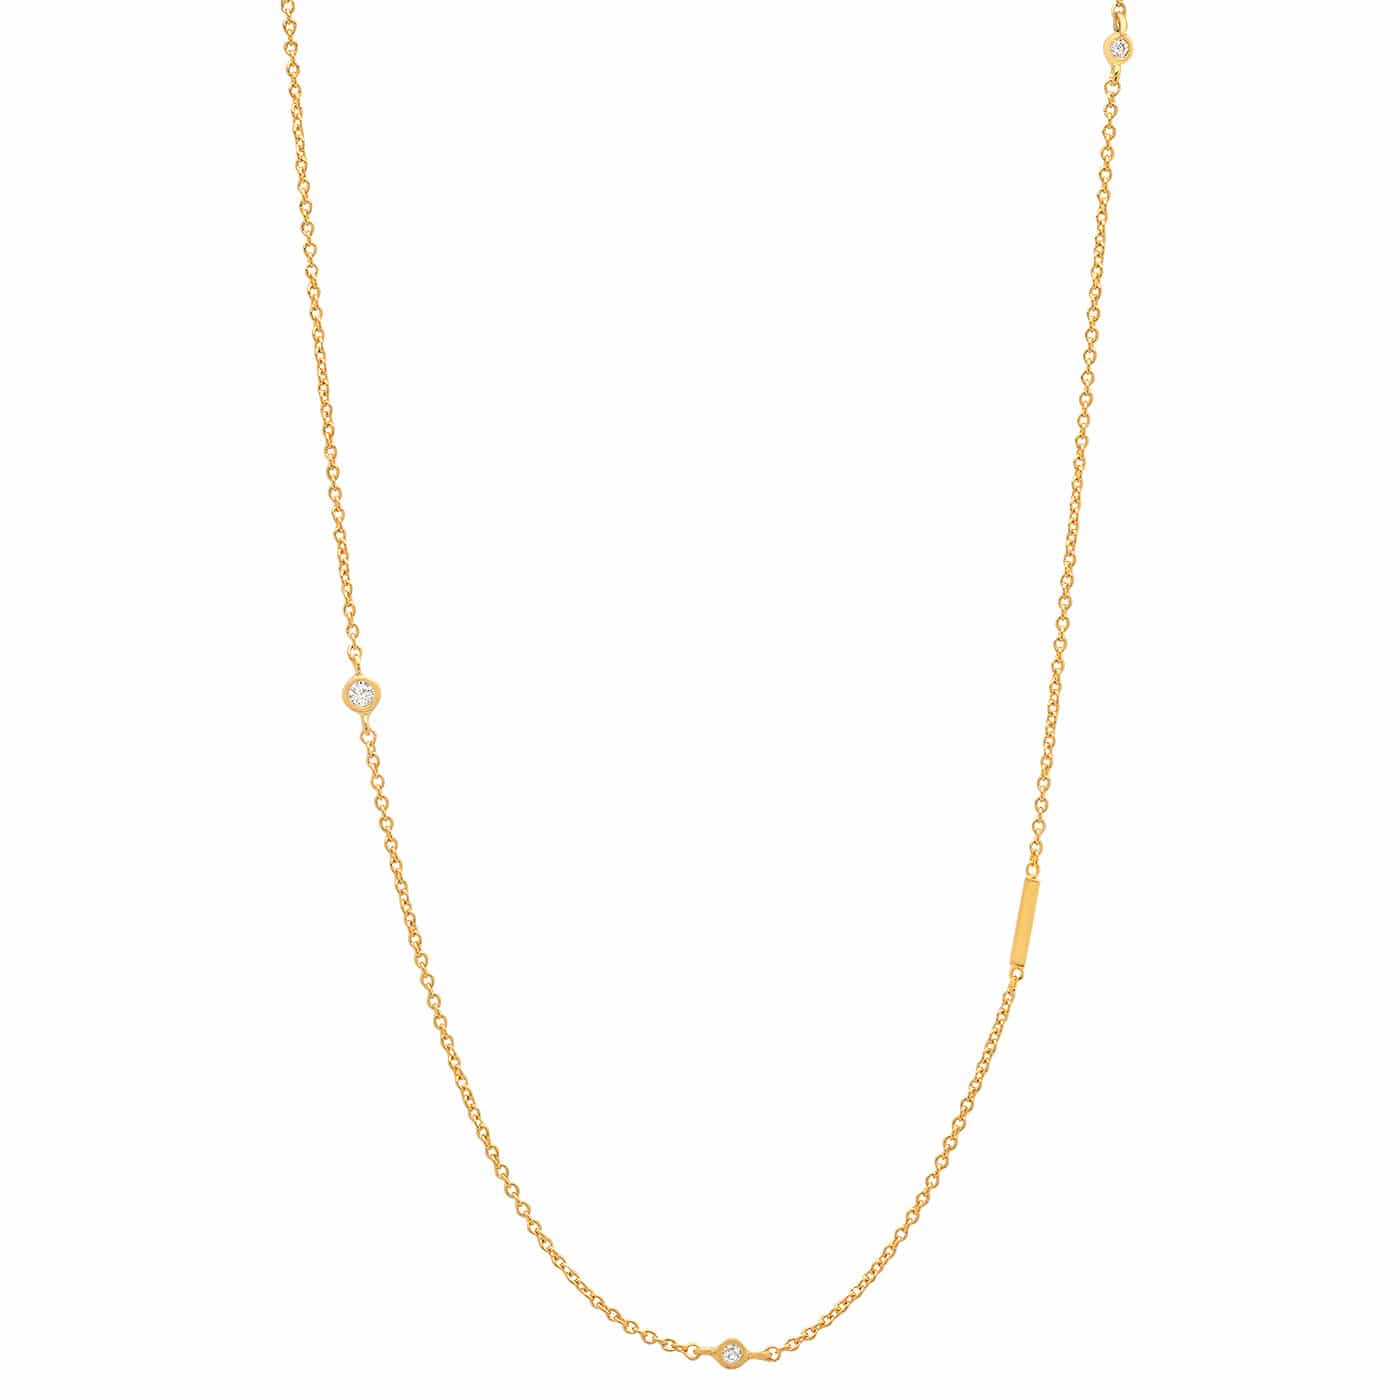 TAI JEWELRY Necklace I Sideways Initial Gold Necklace With CZ Accents